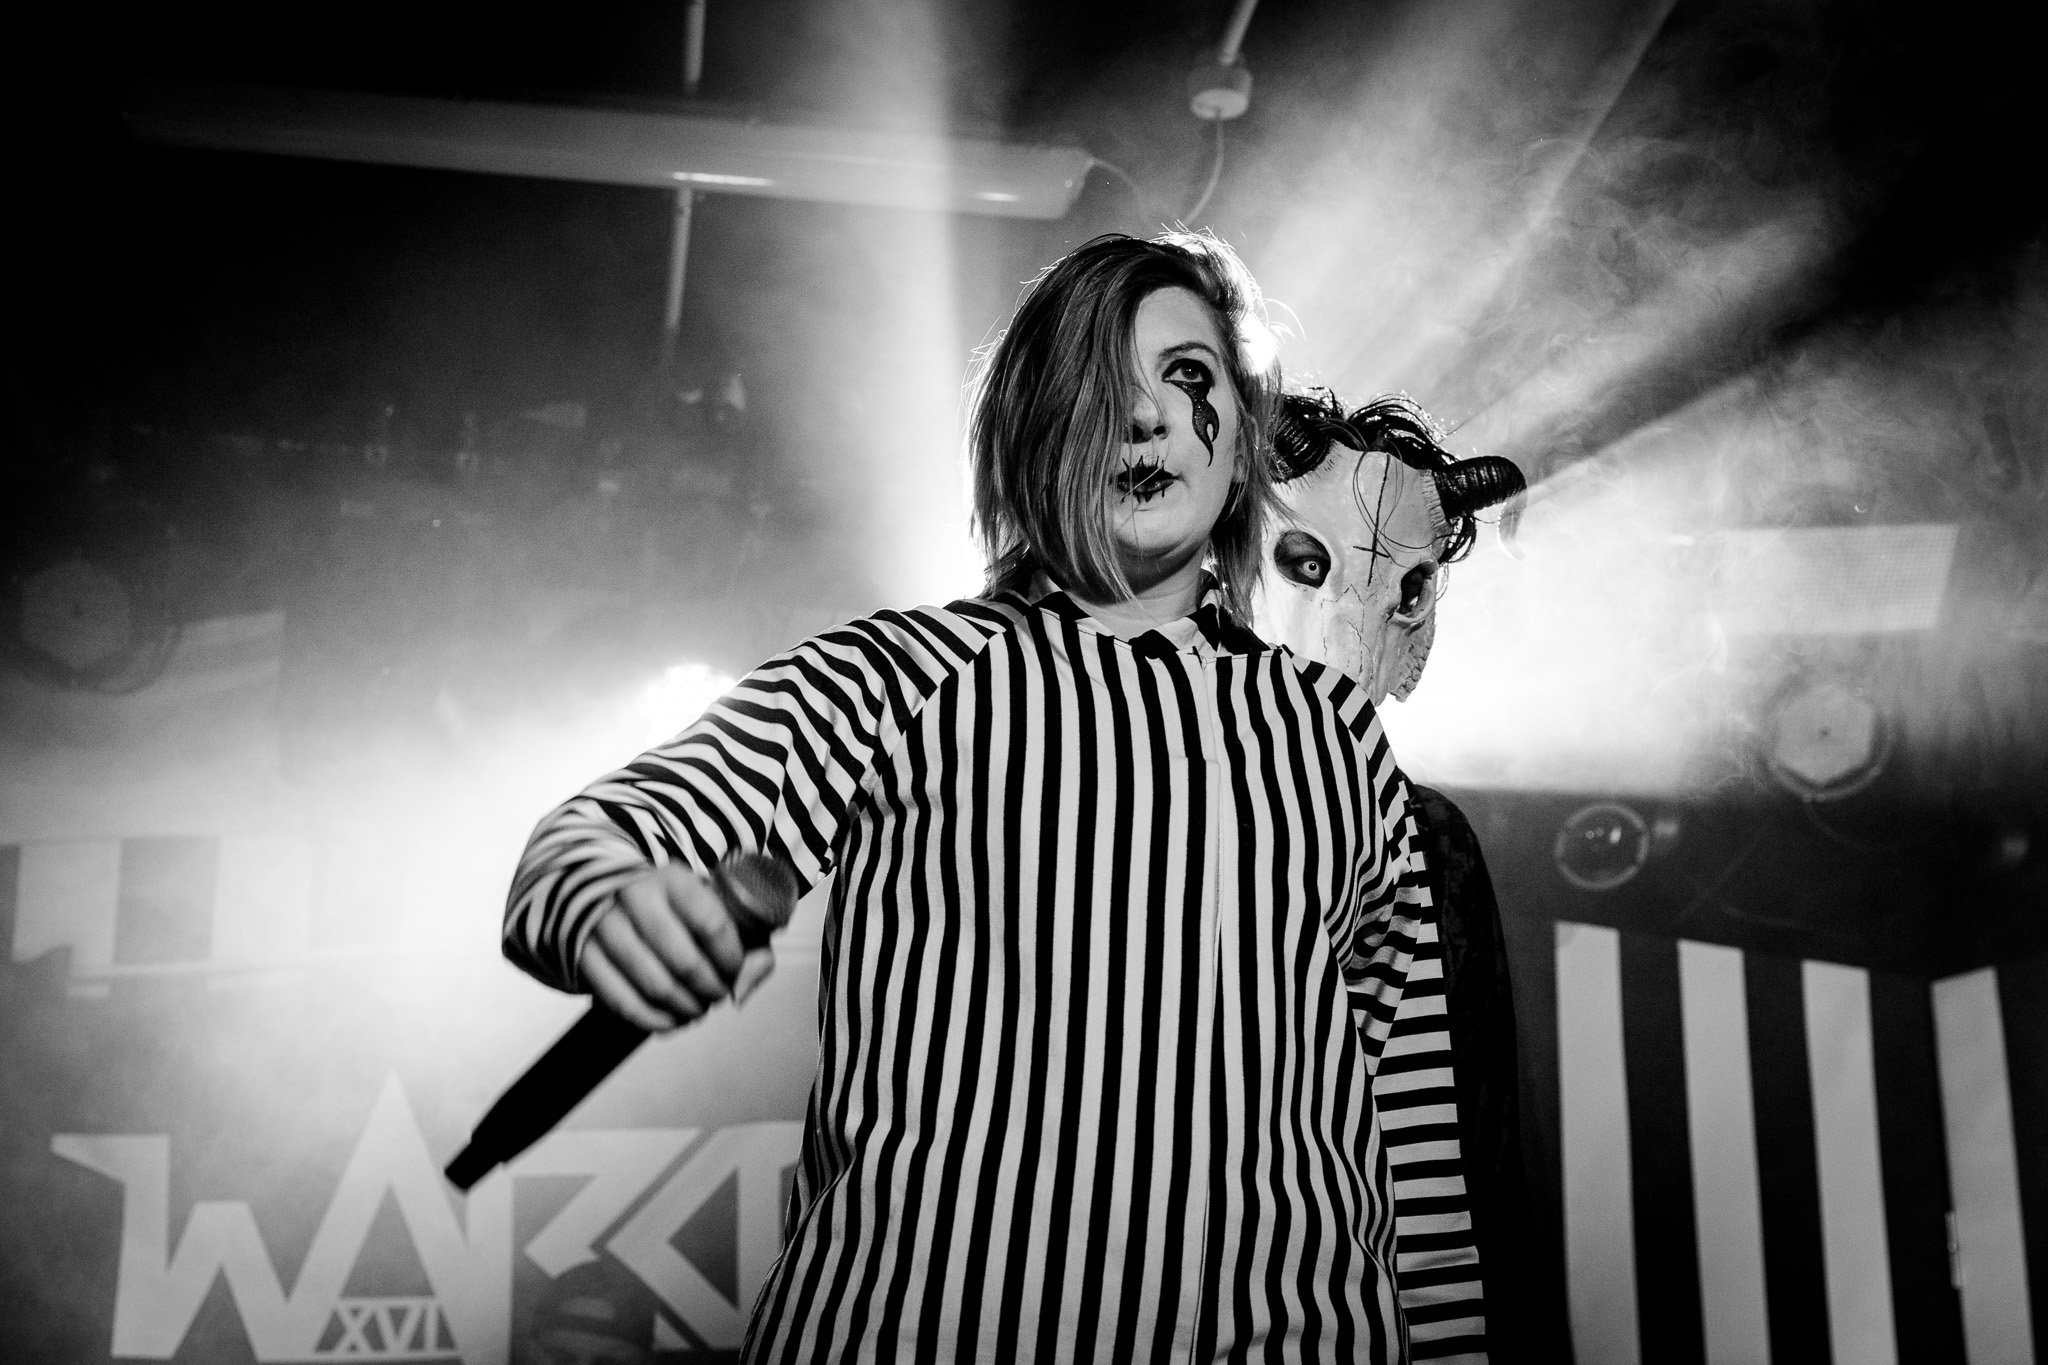 Ward XVI at the Academy 3 in Manchester on December 19th 2021 ©